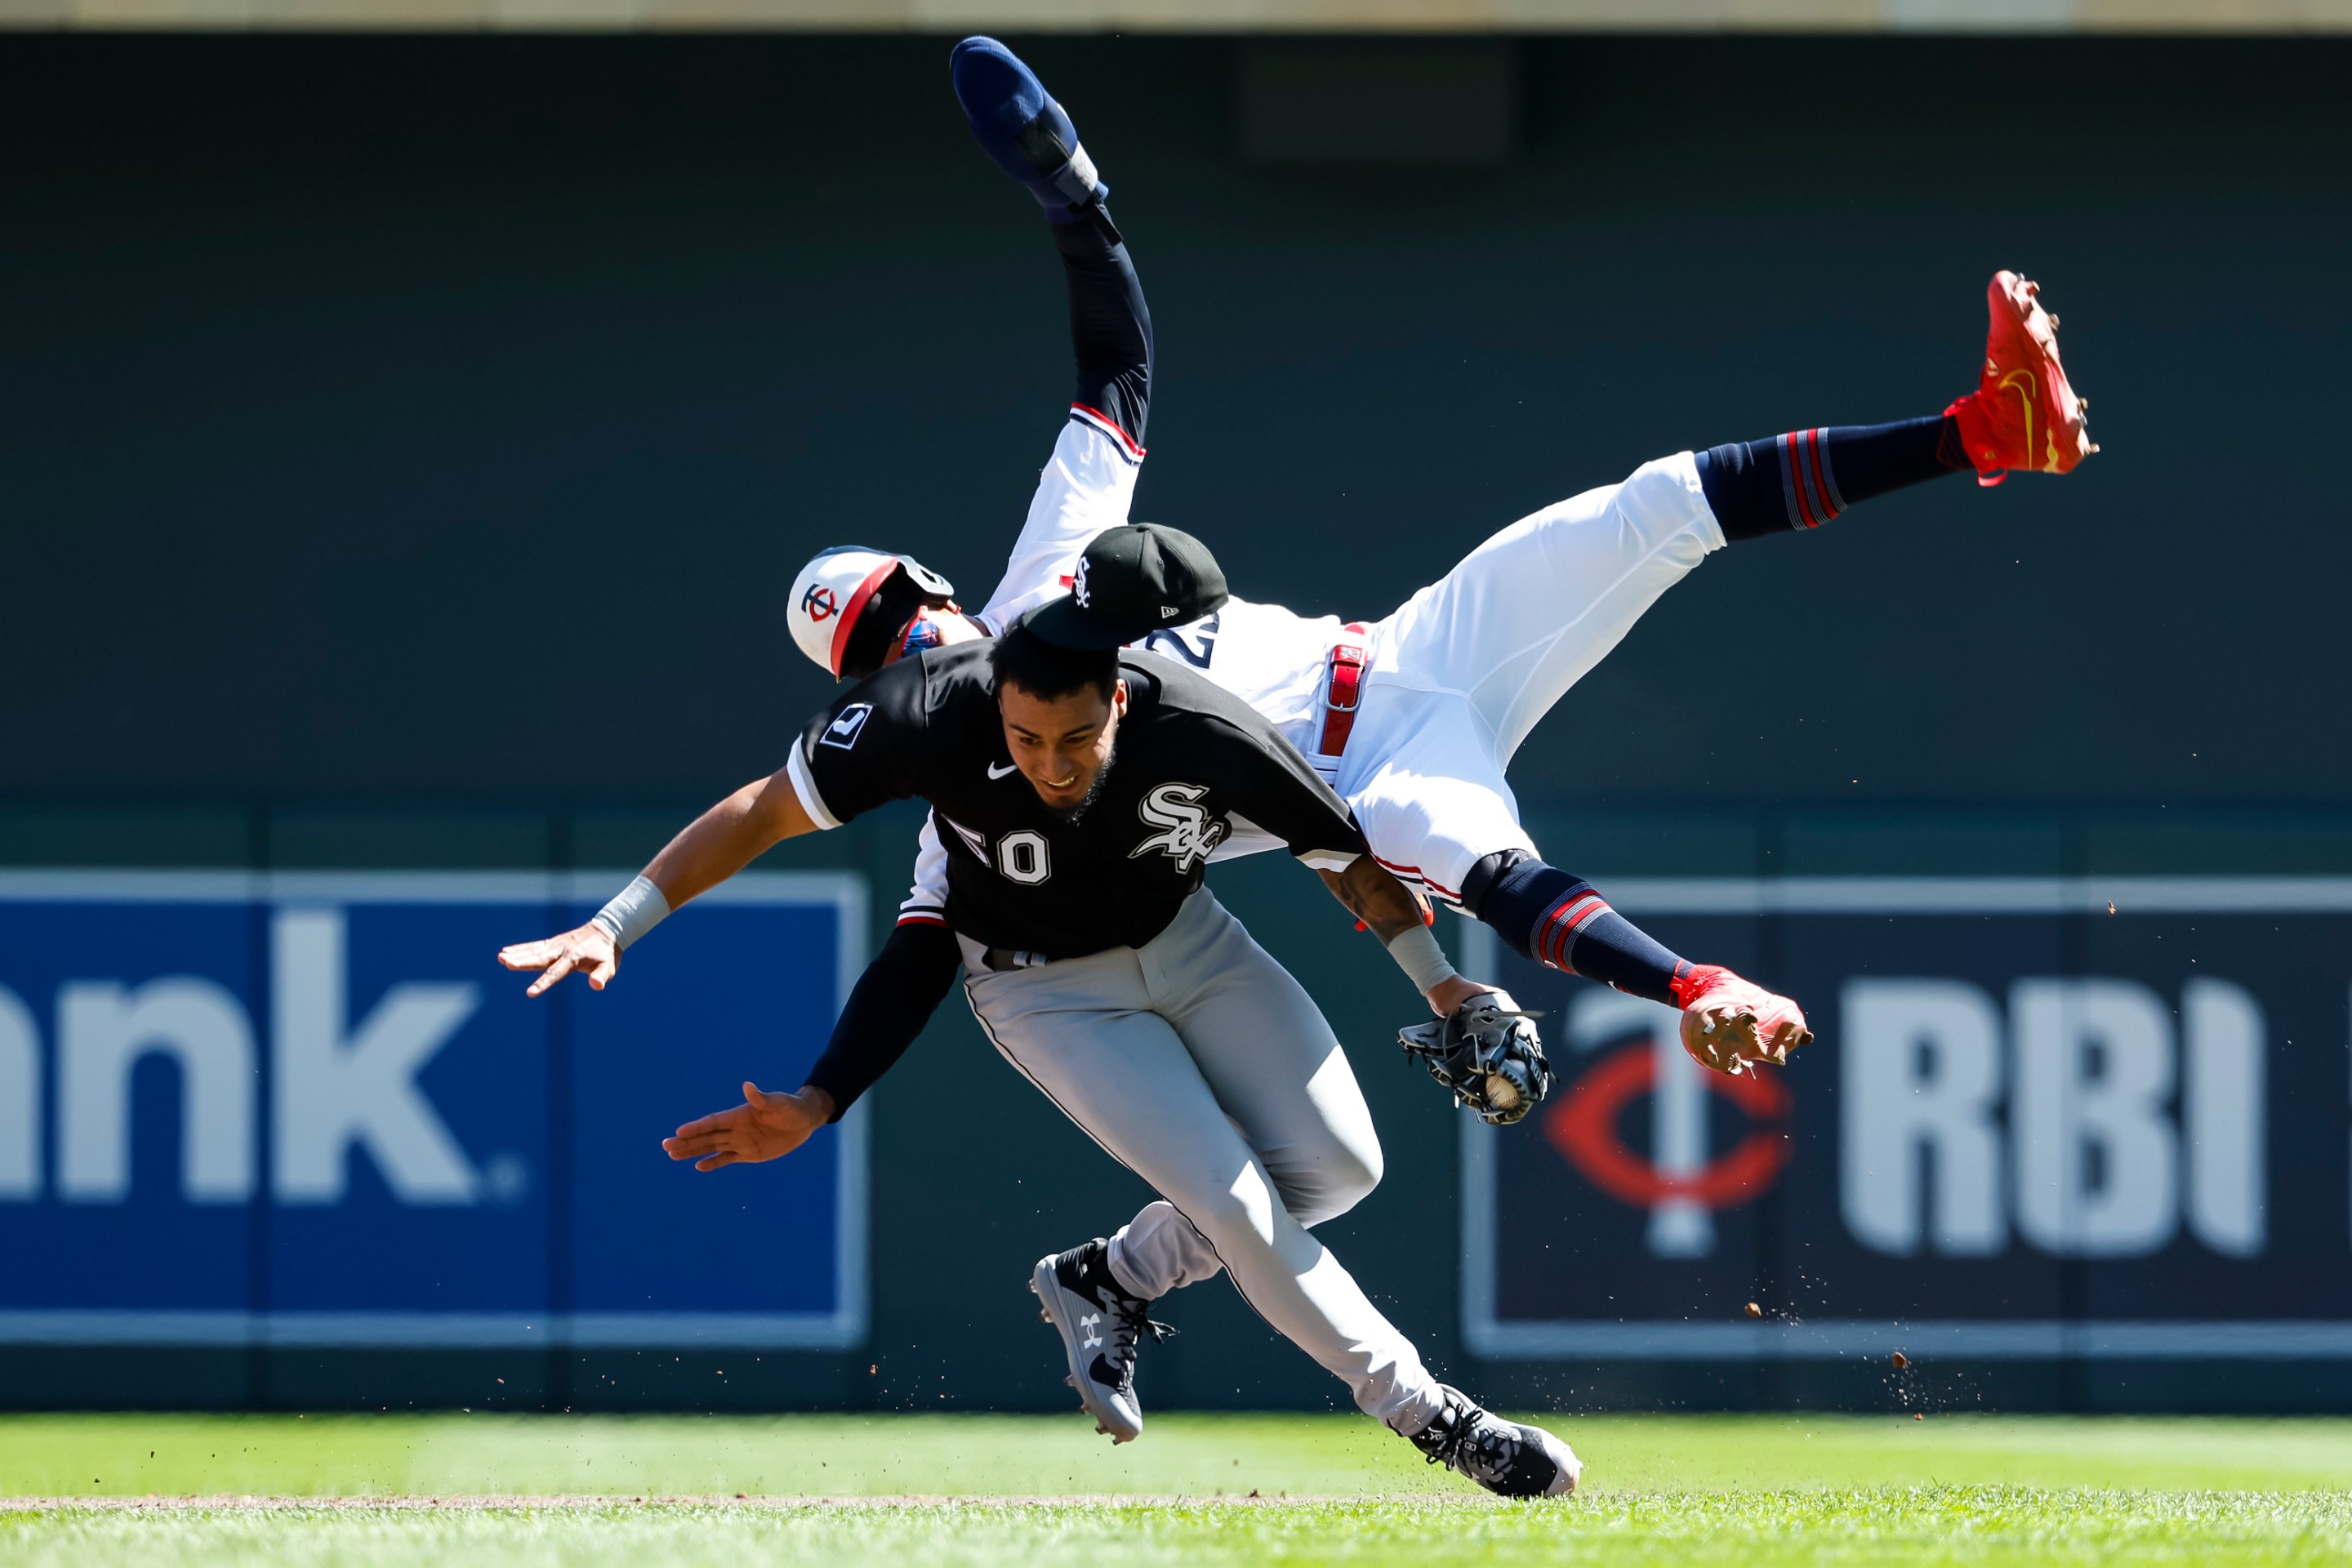 White Sox infielder Lenyn Sosa upends Twins outfielder Byron Buxton in a collision near second base on April 12, 2023.